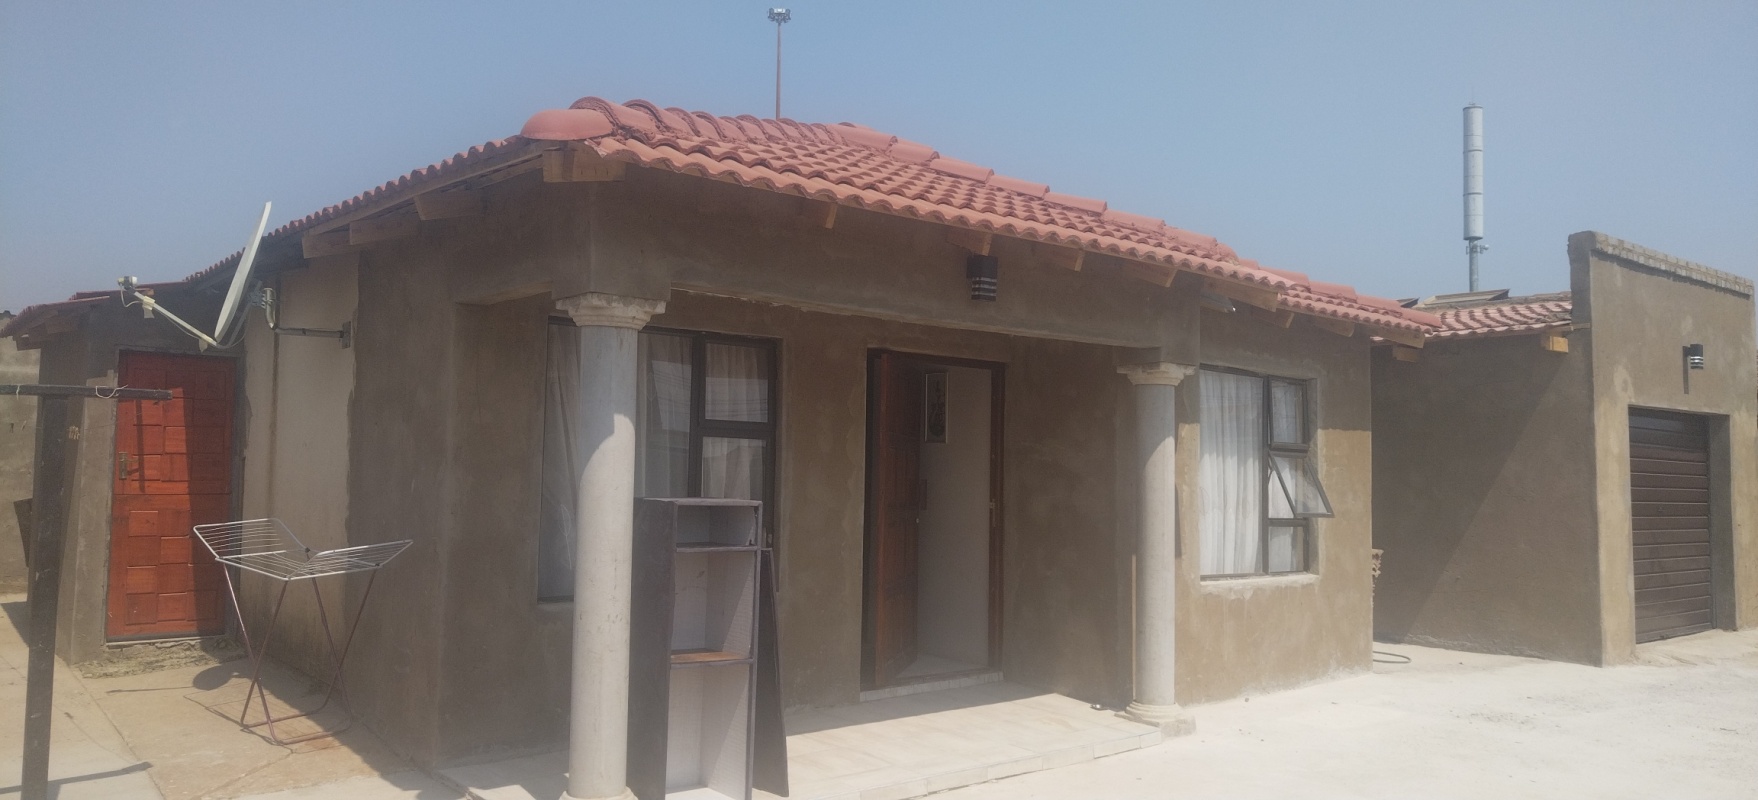 5 Bedroom House  For Sale in Ethafeni | 1355169 | Property.CoZa